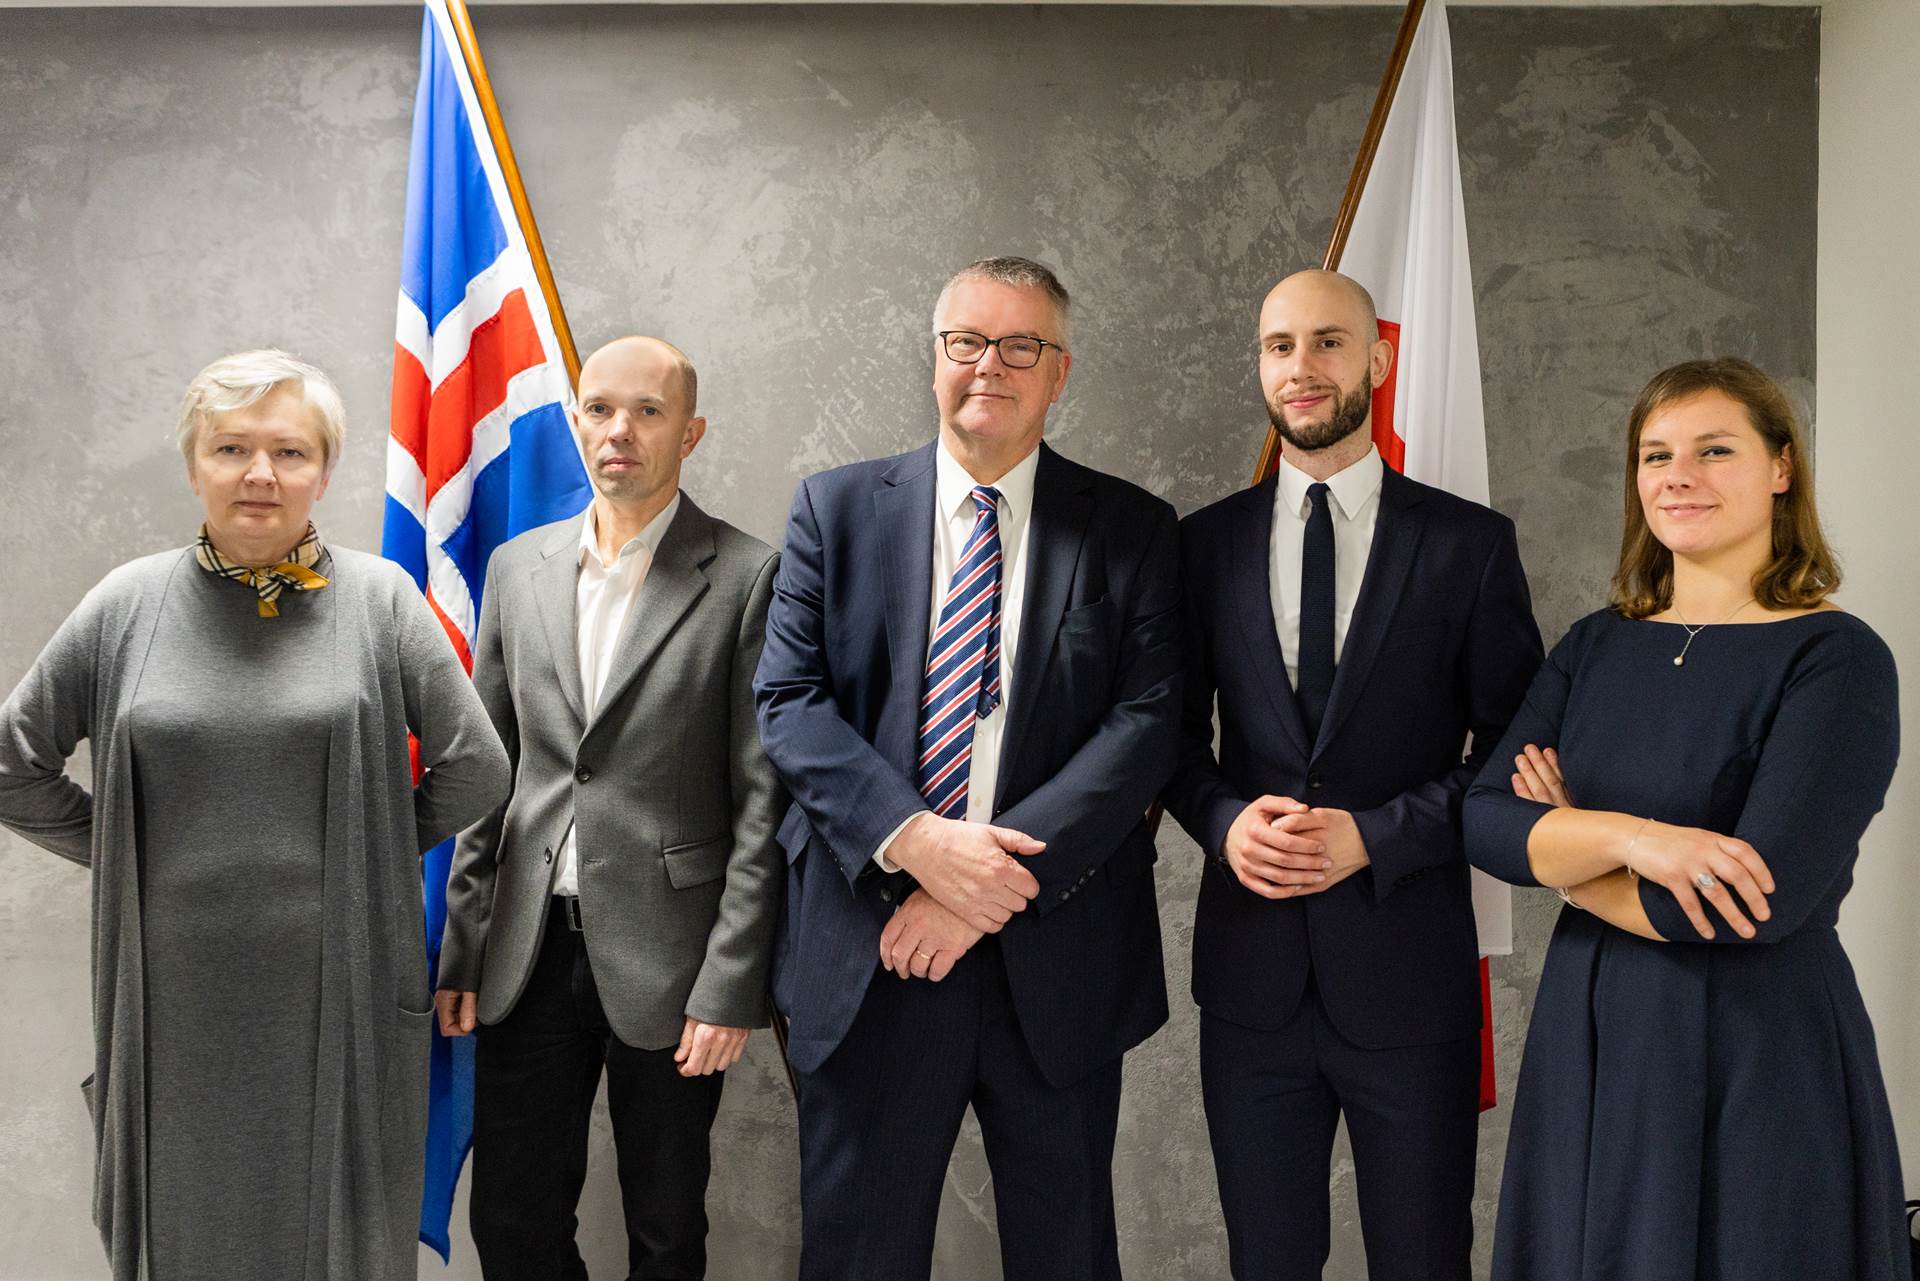 Personnel of the Embassy of Iceland in Warsaw